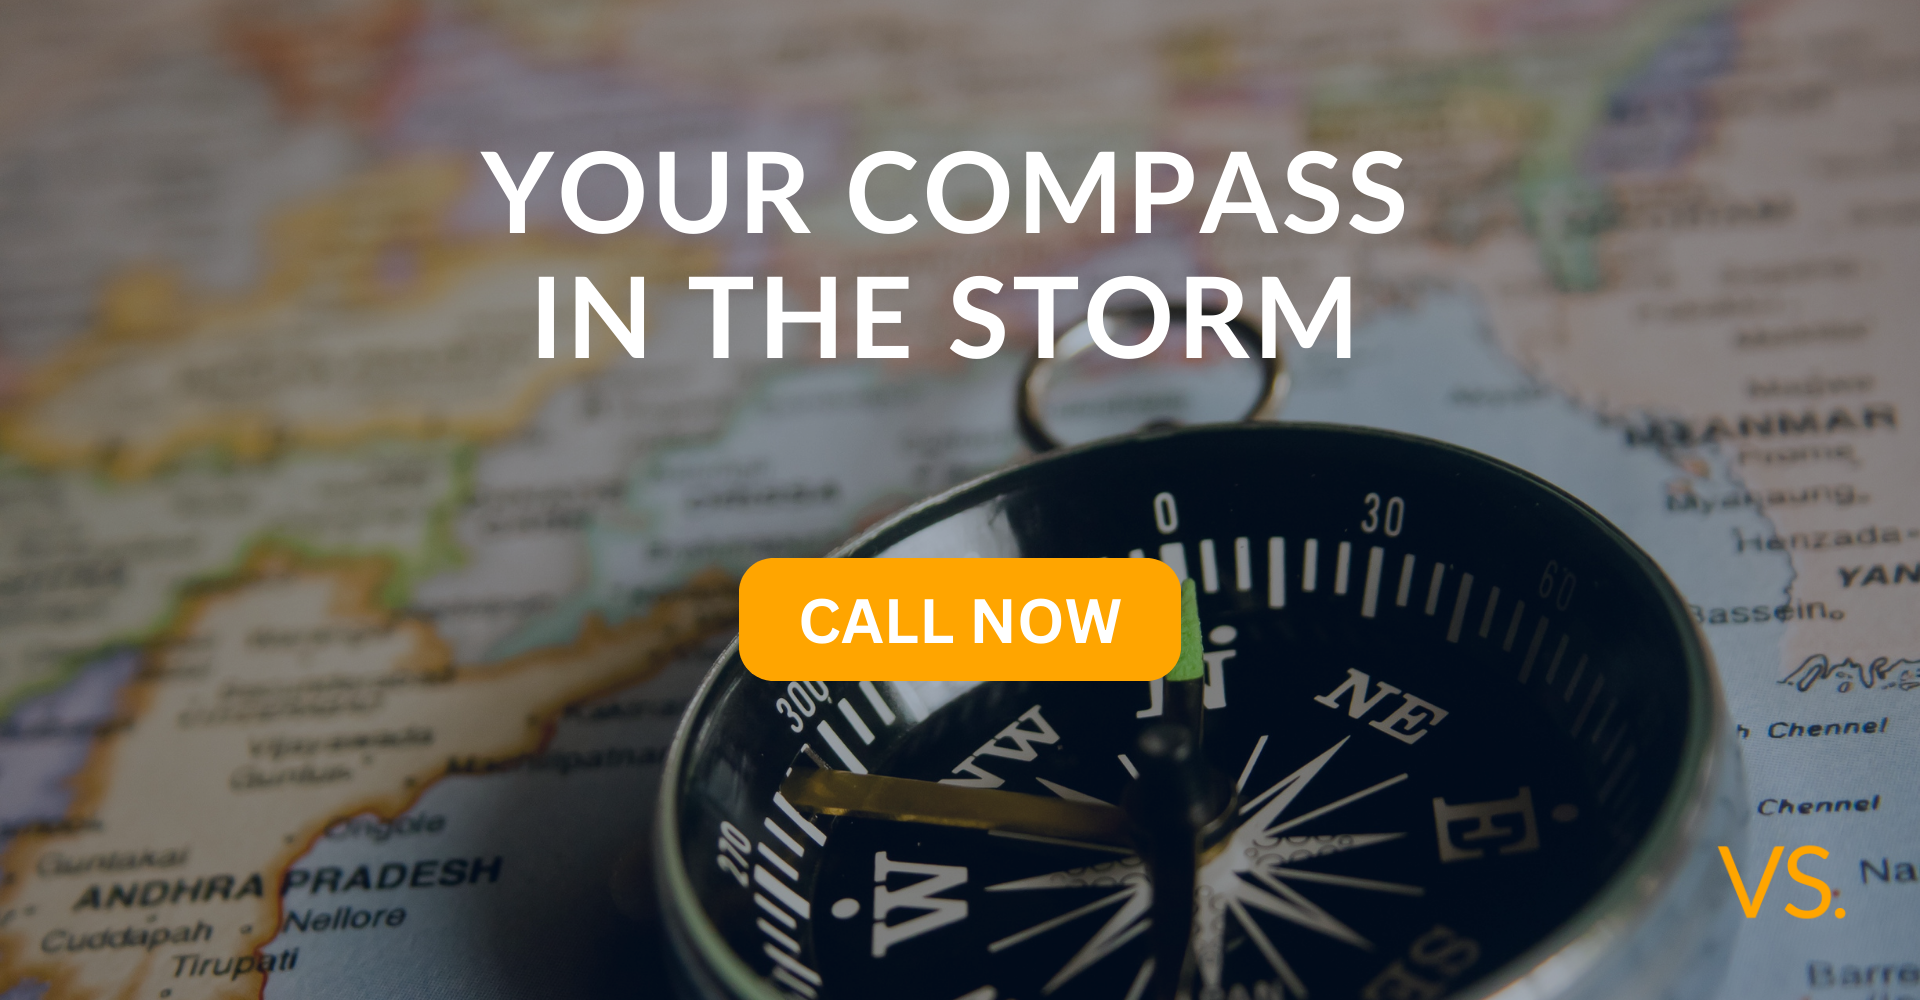 Our lawyers are your compass in the storm.